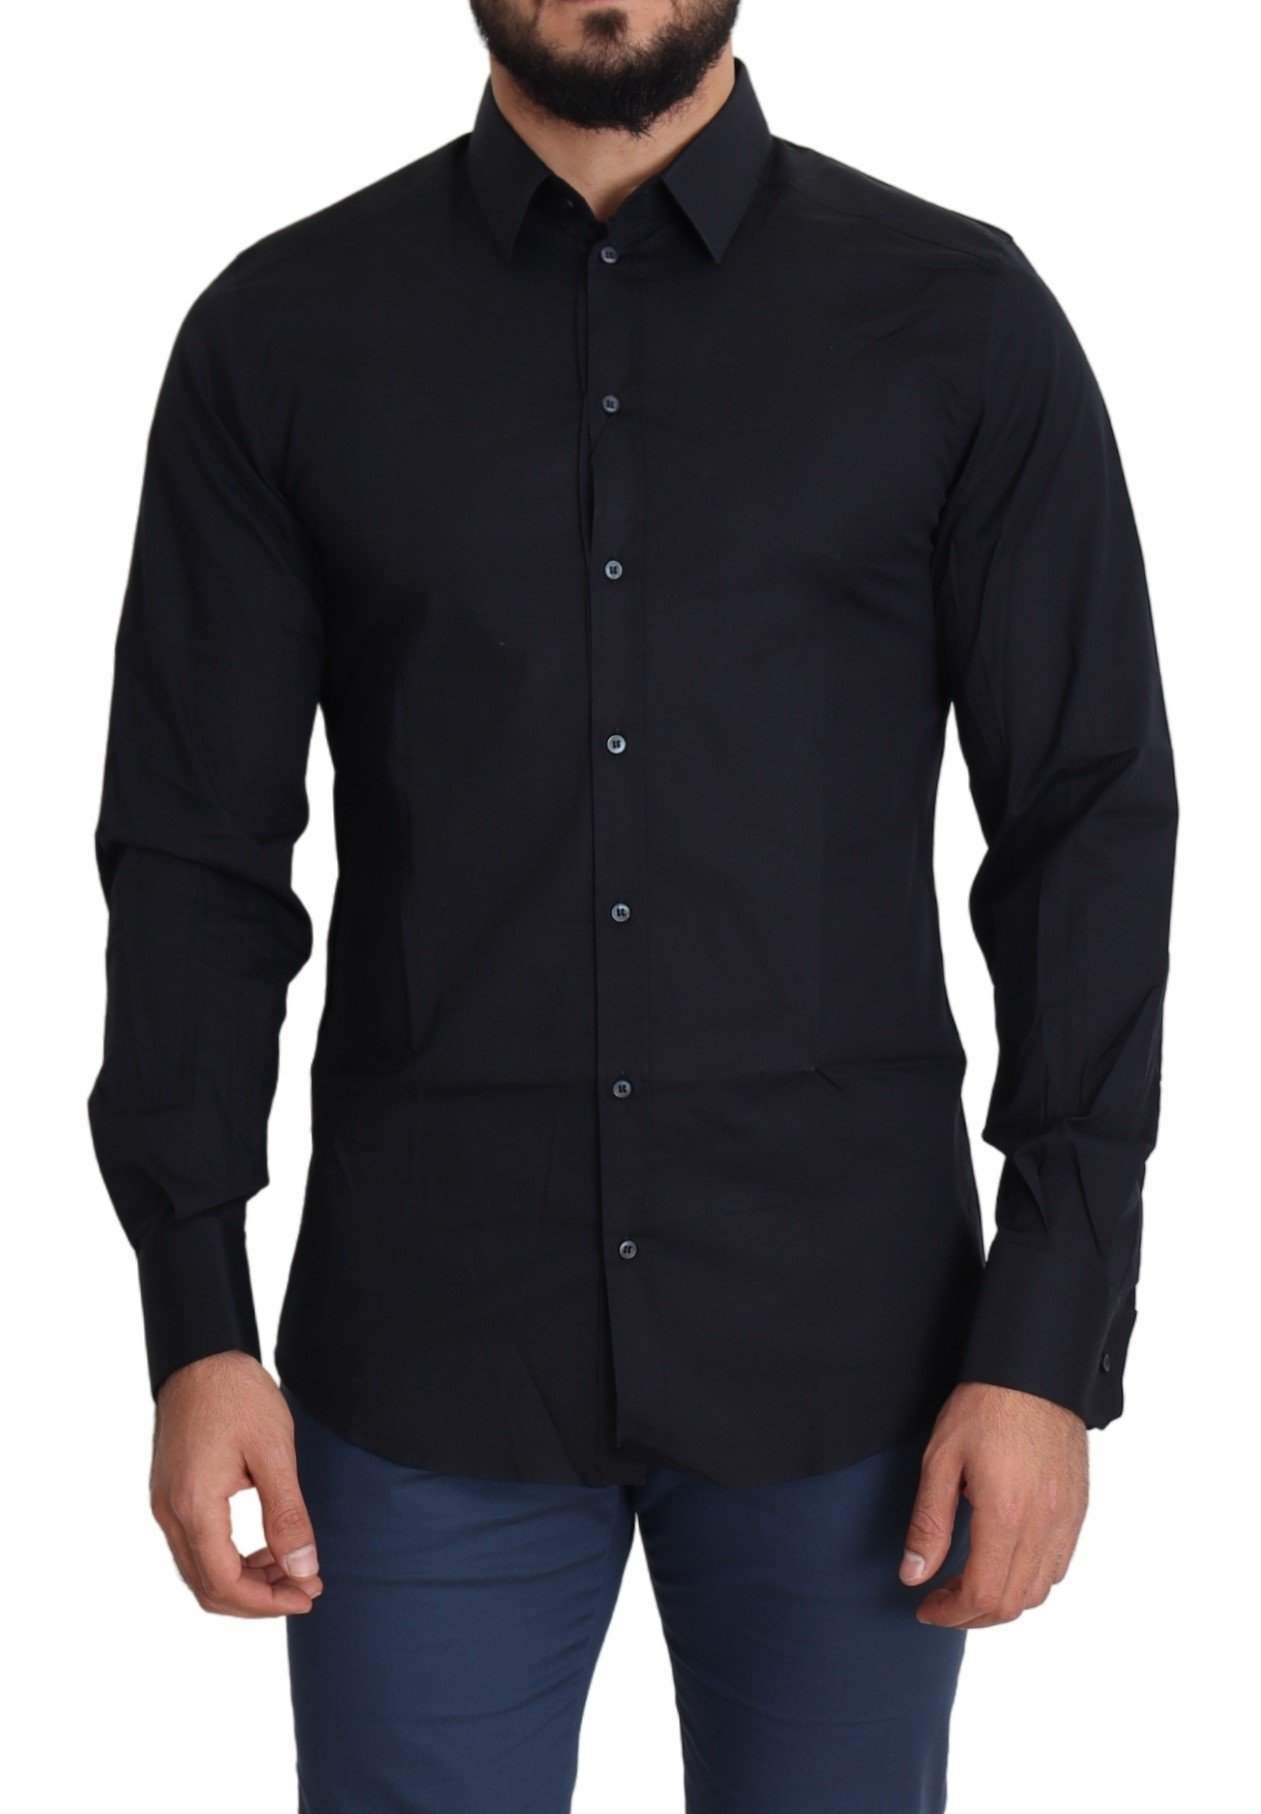 Dolce & Gabbana Black Cotton Formal GOLD Dress Shirt #men, Black, Brand_Dolce & Gabbana, Dolce & Gabbana, feed-agegroup-adult, feed-color-black, feed-gender-male, feed-size-IT38 | XS, feed-size-IT40 | M, Gender_Men, IT38 | XS, IT40 | M, Men - New Arrivals, Shirts - Men - Clothing at SEYMAYKA